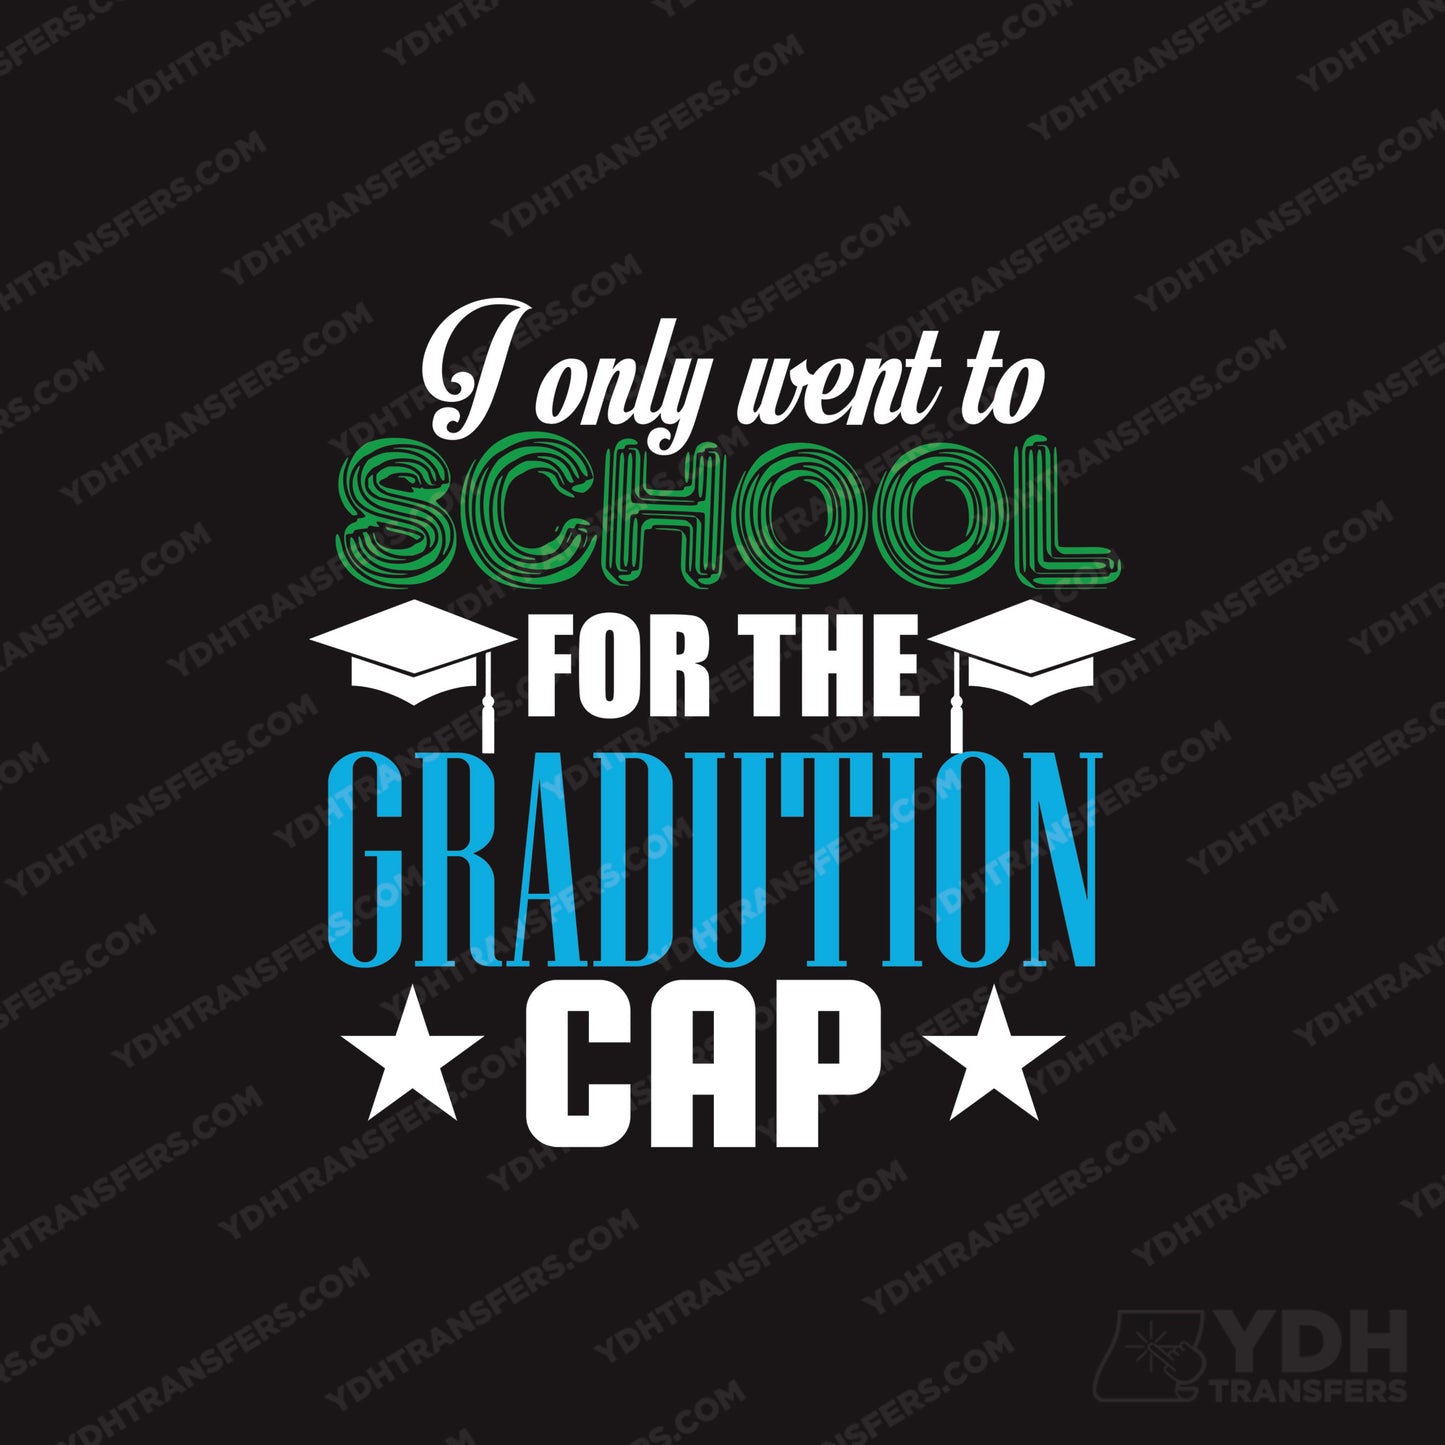 I Went for the Graduation Cap Full Color Transfer